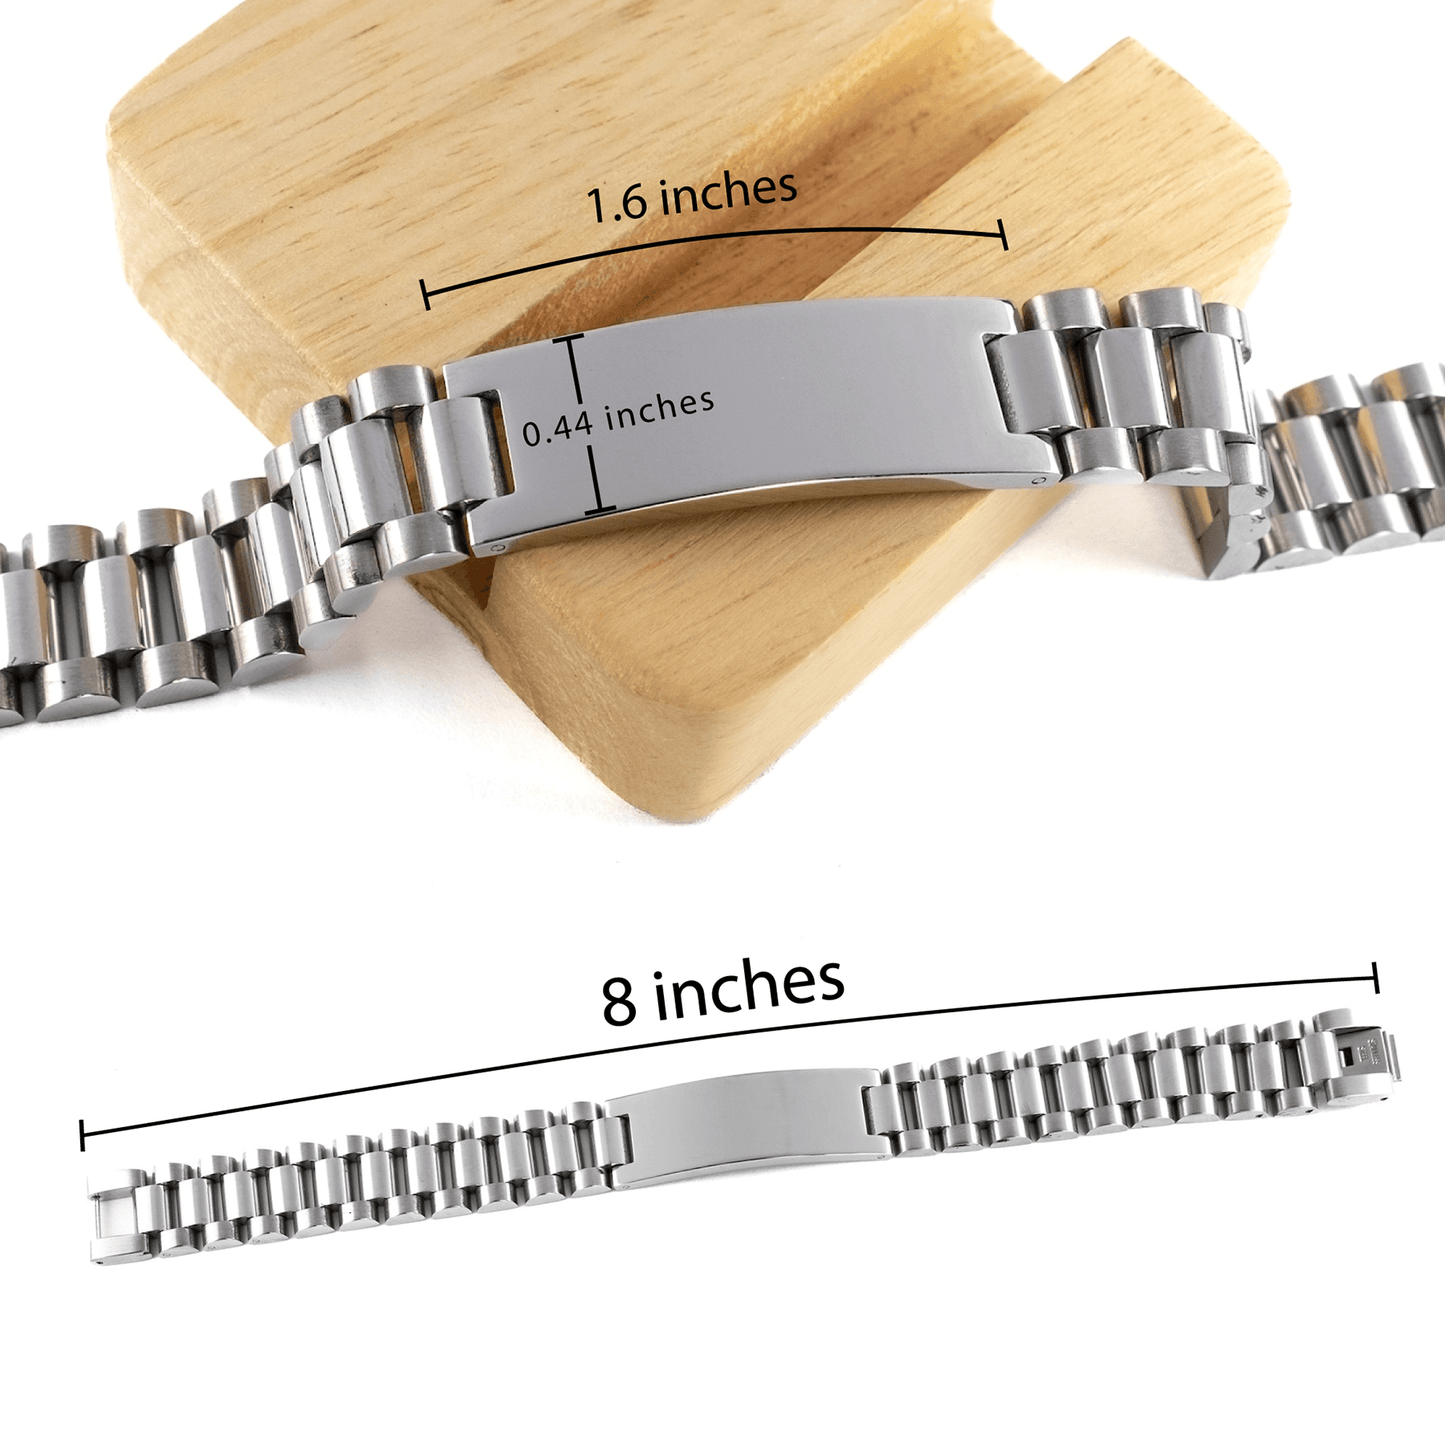 Remarkable Mixologist Gifts, Your dedication and hard work, Inspirational Birthday Christmas Unique Ladder Stainless Steel Bracelet For Mixologist, Coworkers, Men, Women, Friends - Mallard Moon Gift Shop